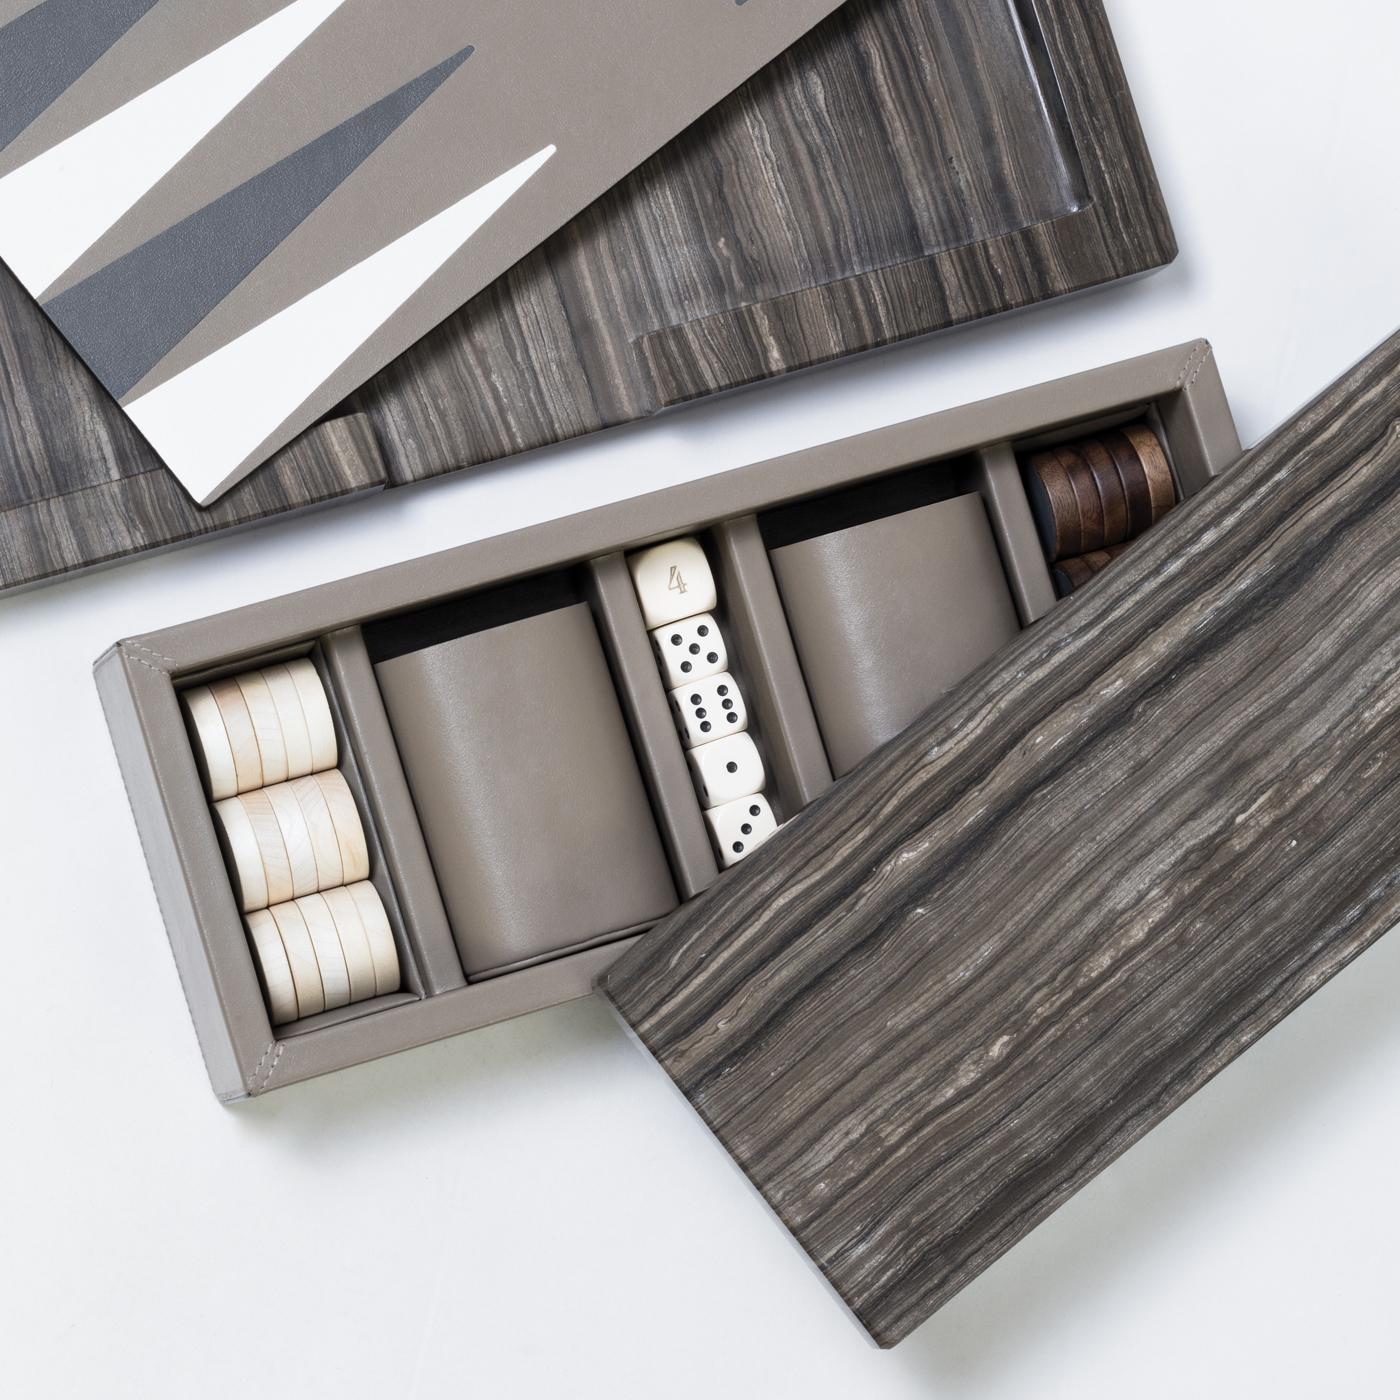 Part of the Ettore collection, this elegant backgammon board is so striking that can be displayed on a living room coffee table, console, or side table as a superb decorative object. The rectangular Silhouette in Eramosa brown marble features inlays